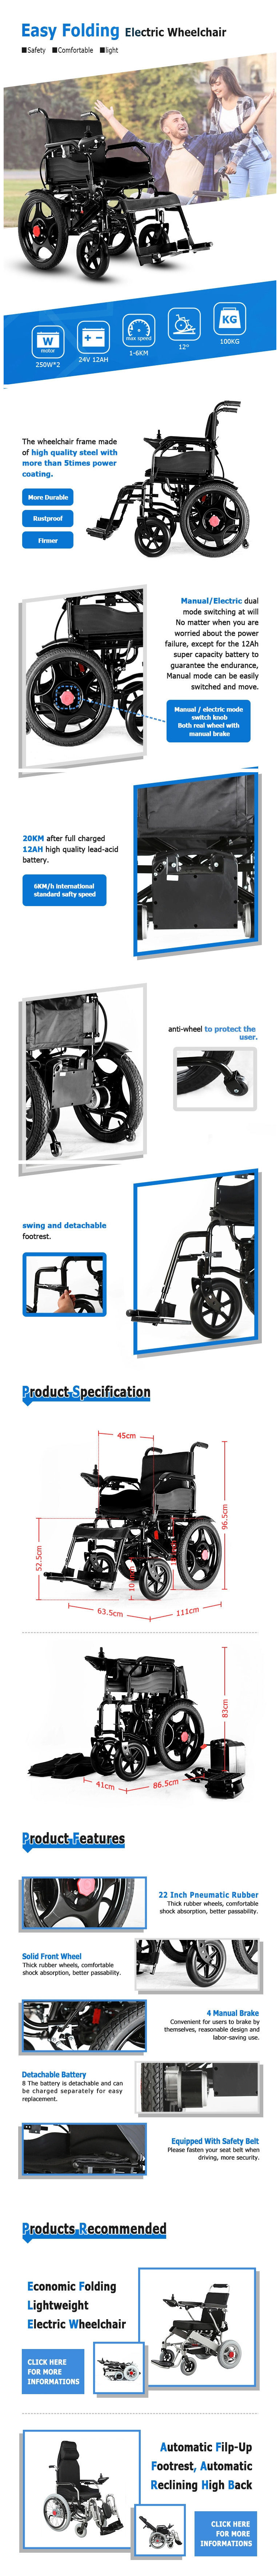 Economic Small Stainless Steel Power Electric Wheelchair for Disabled Elderly